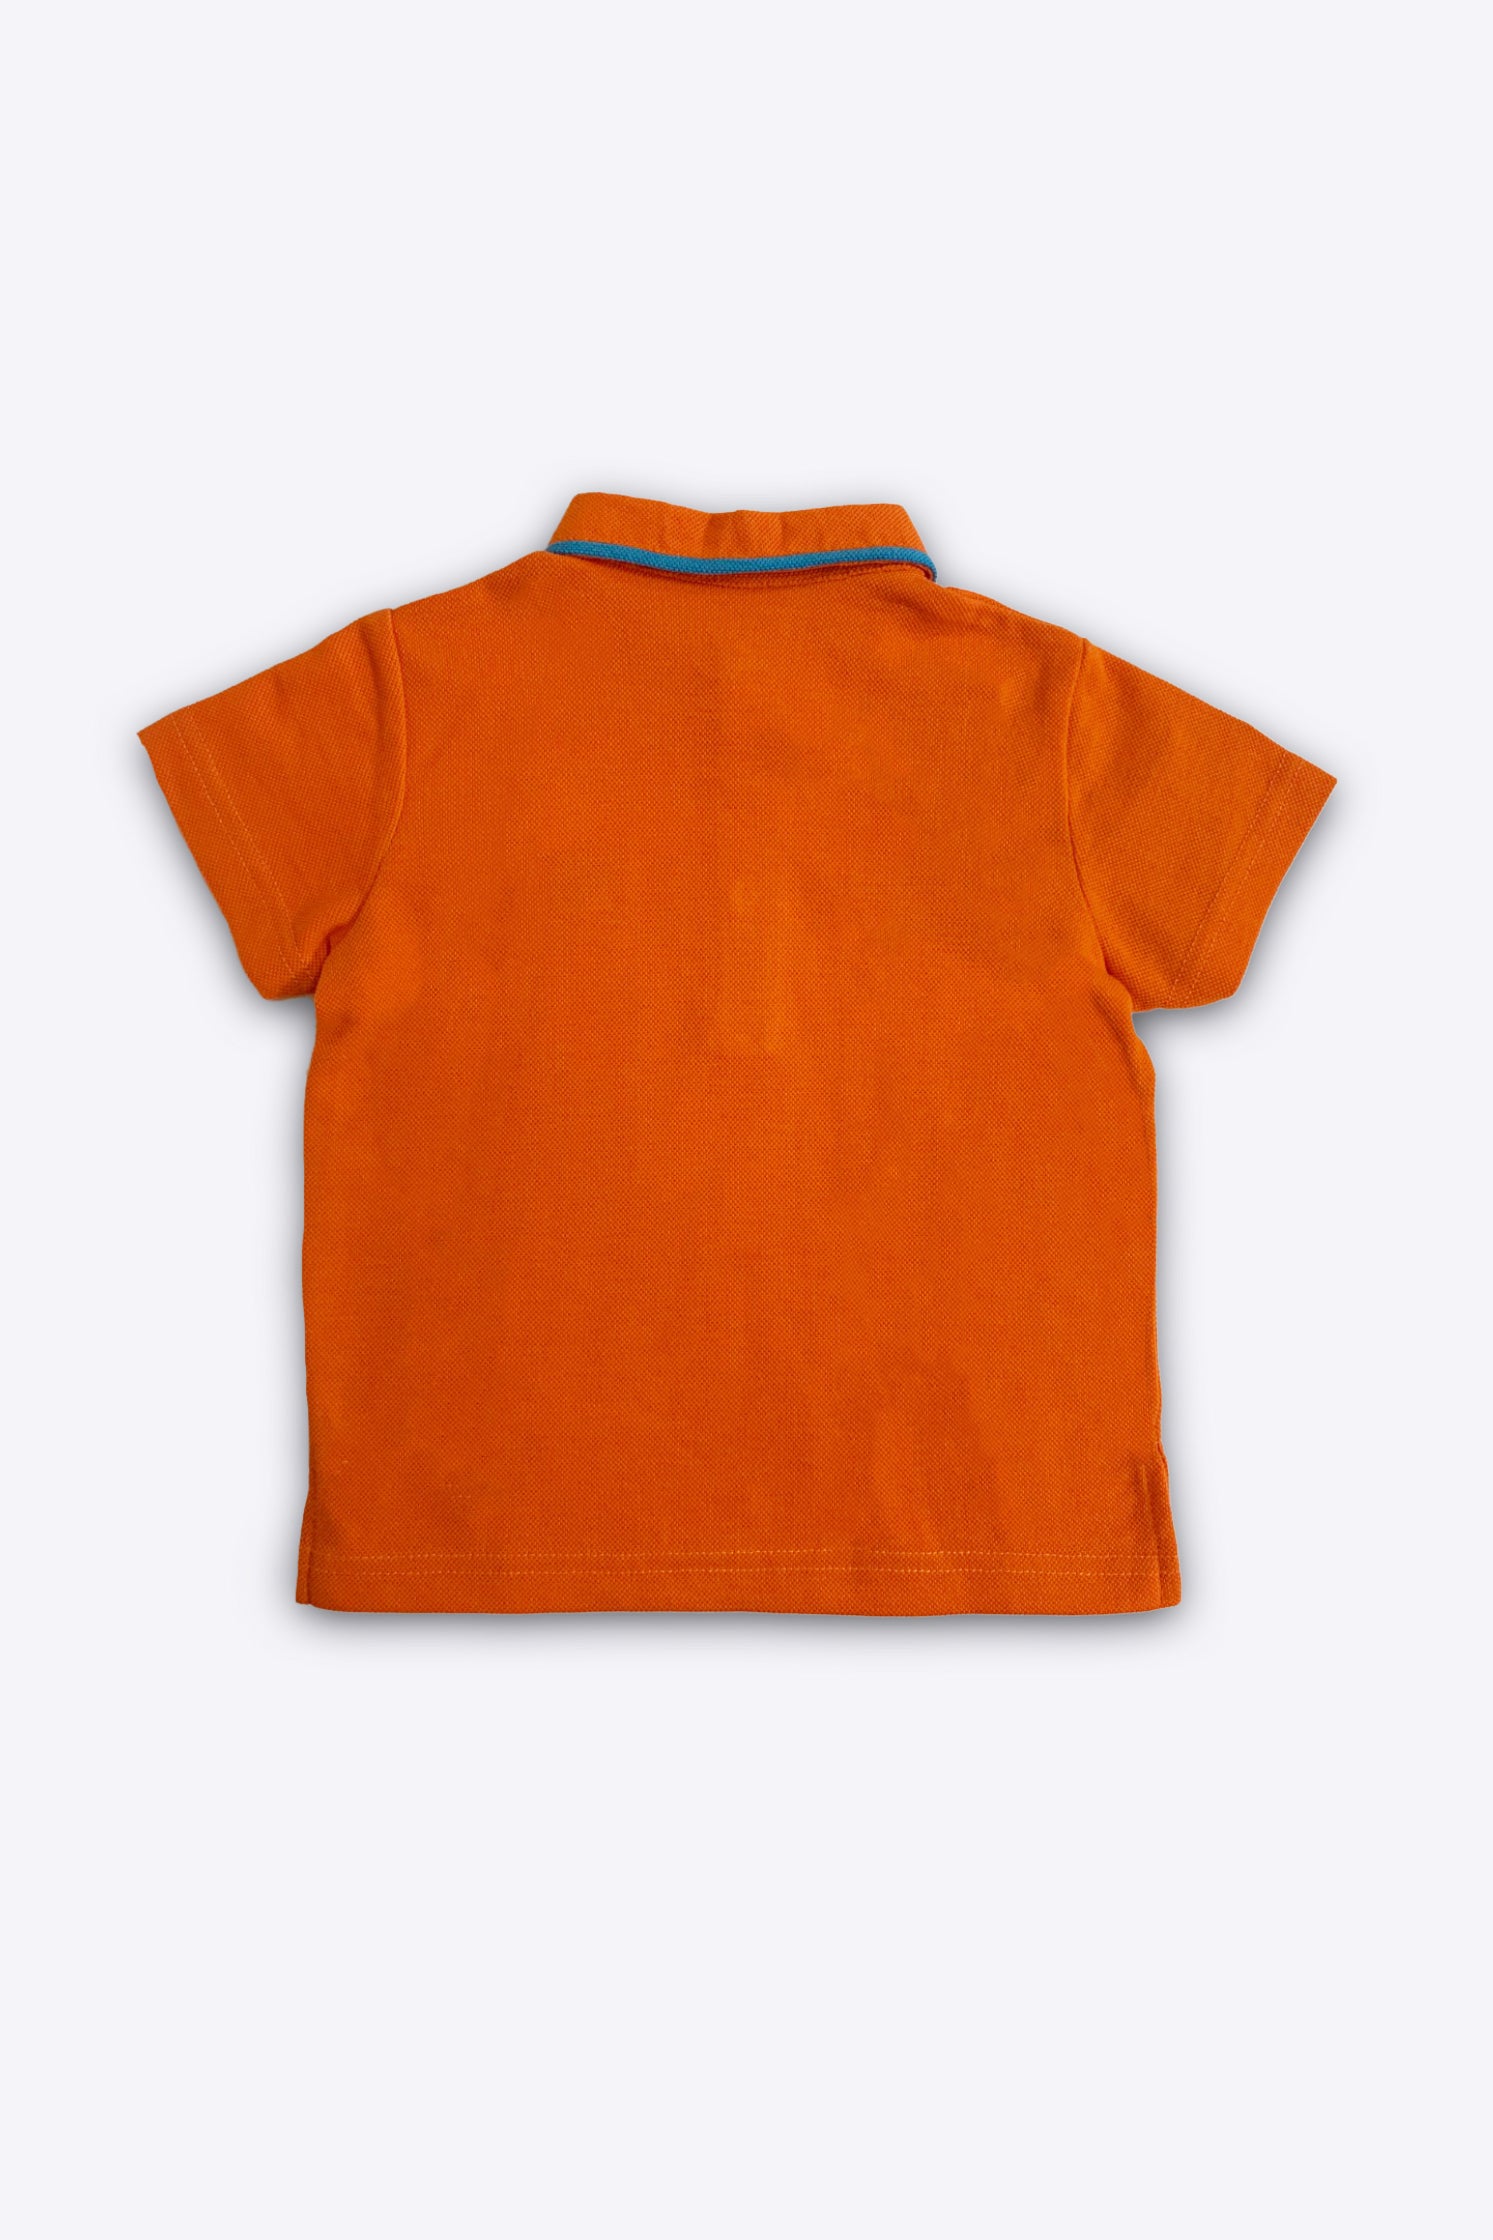 KIDS POLO ORANGE FRONT EMBROIDERY